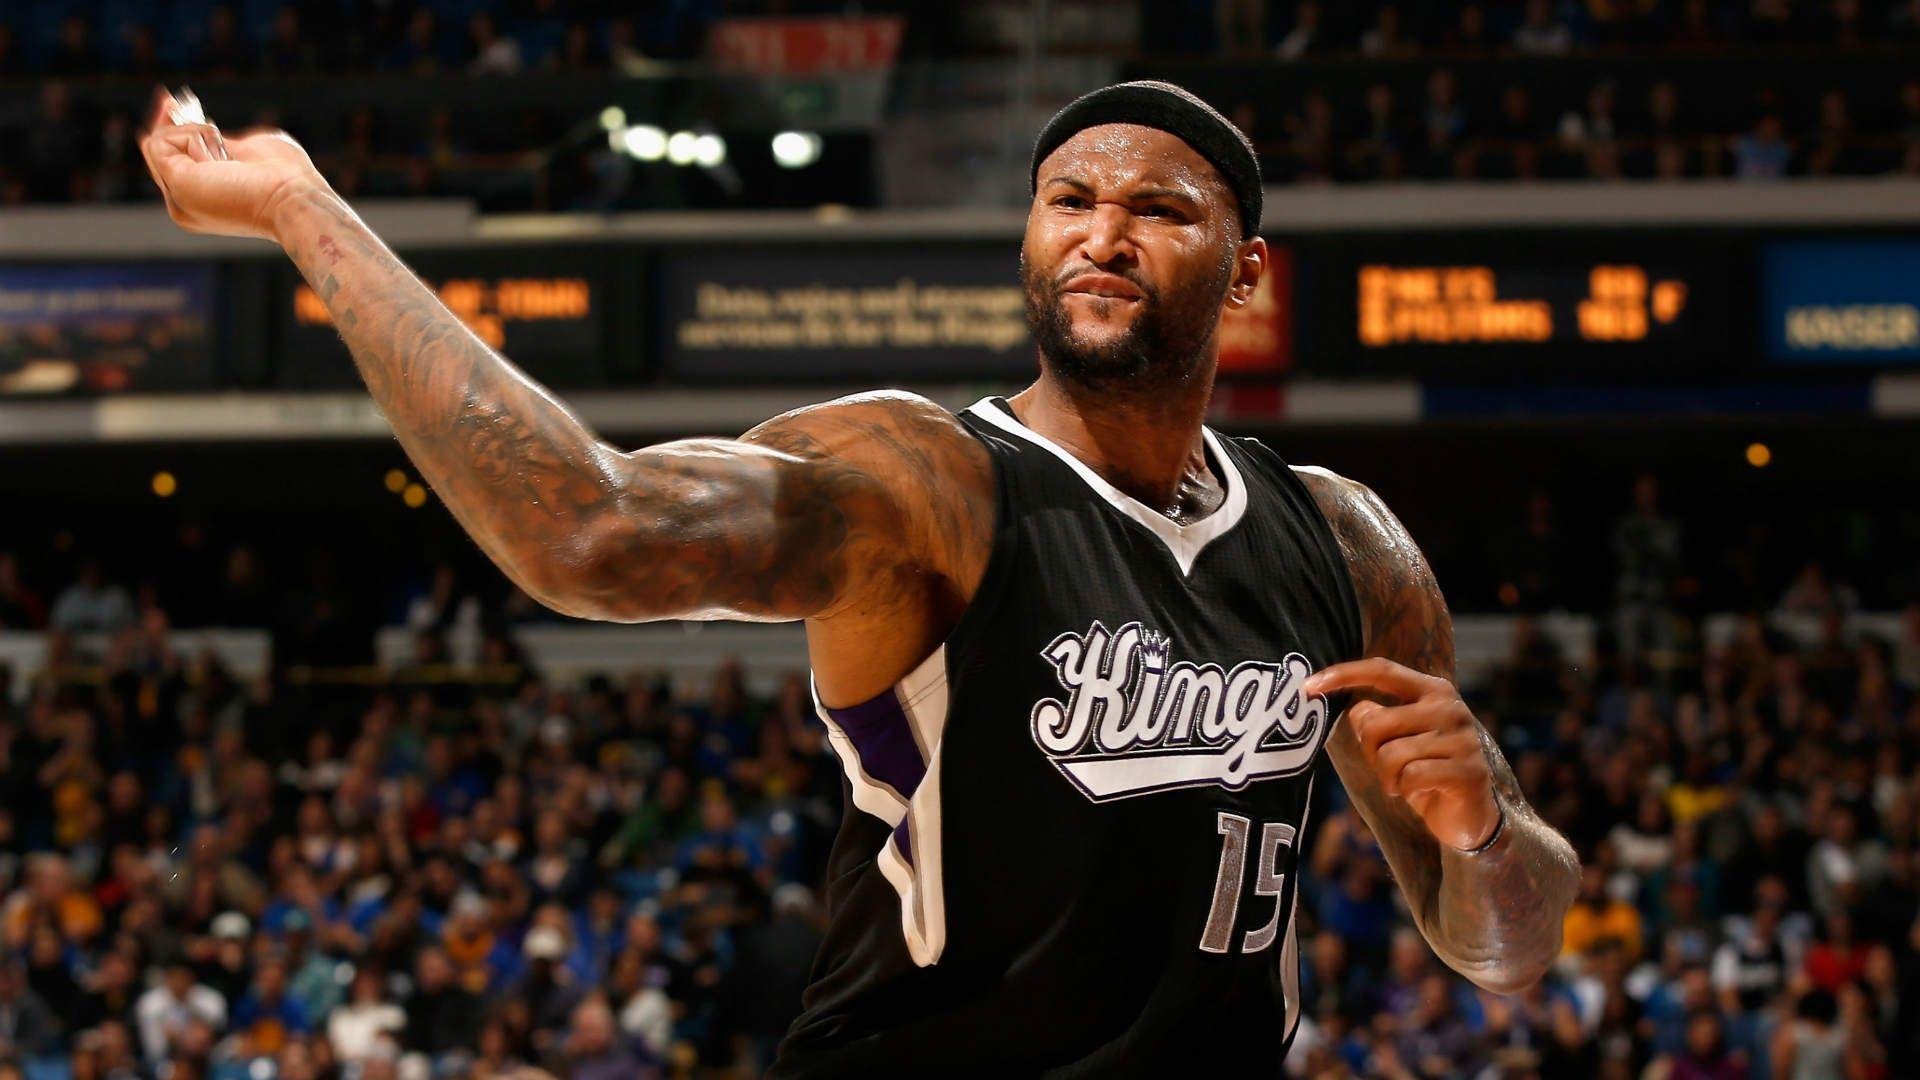 DeMarcus Cousins rips Kings' effort: 'I'm tired of these f—ing